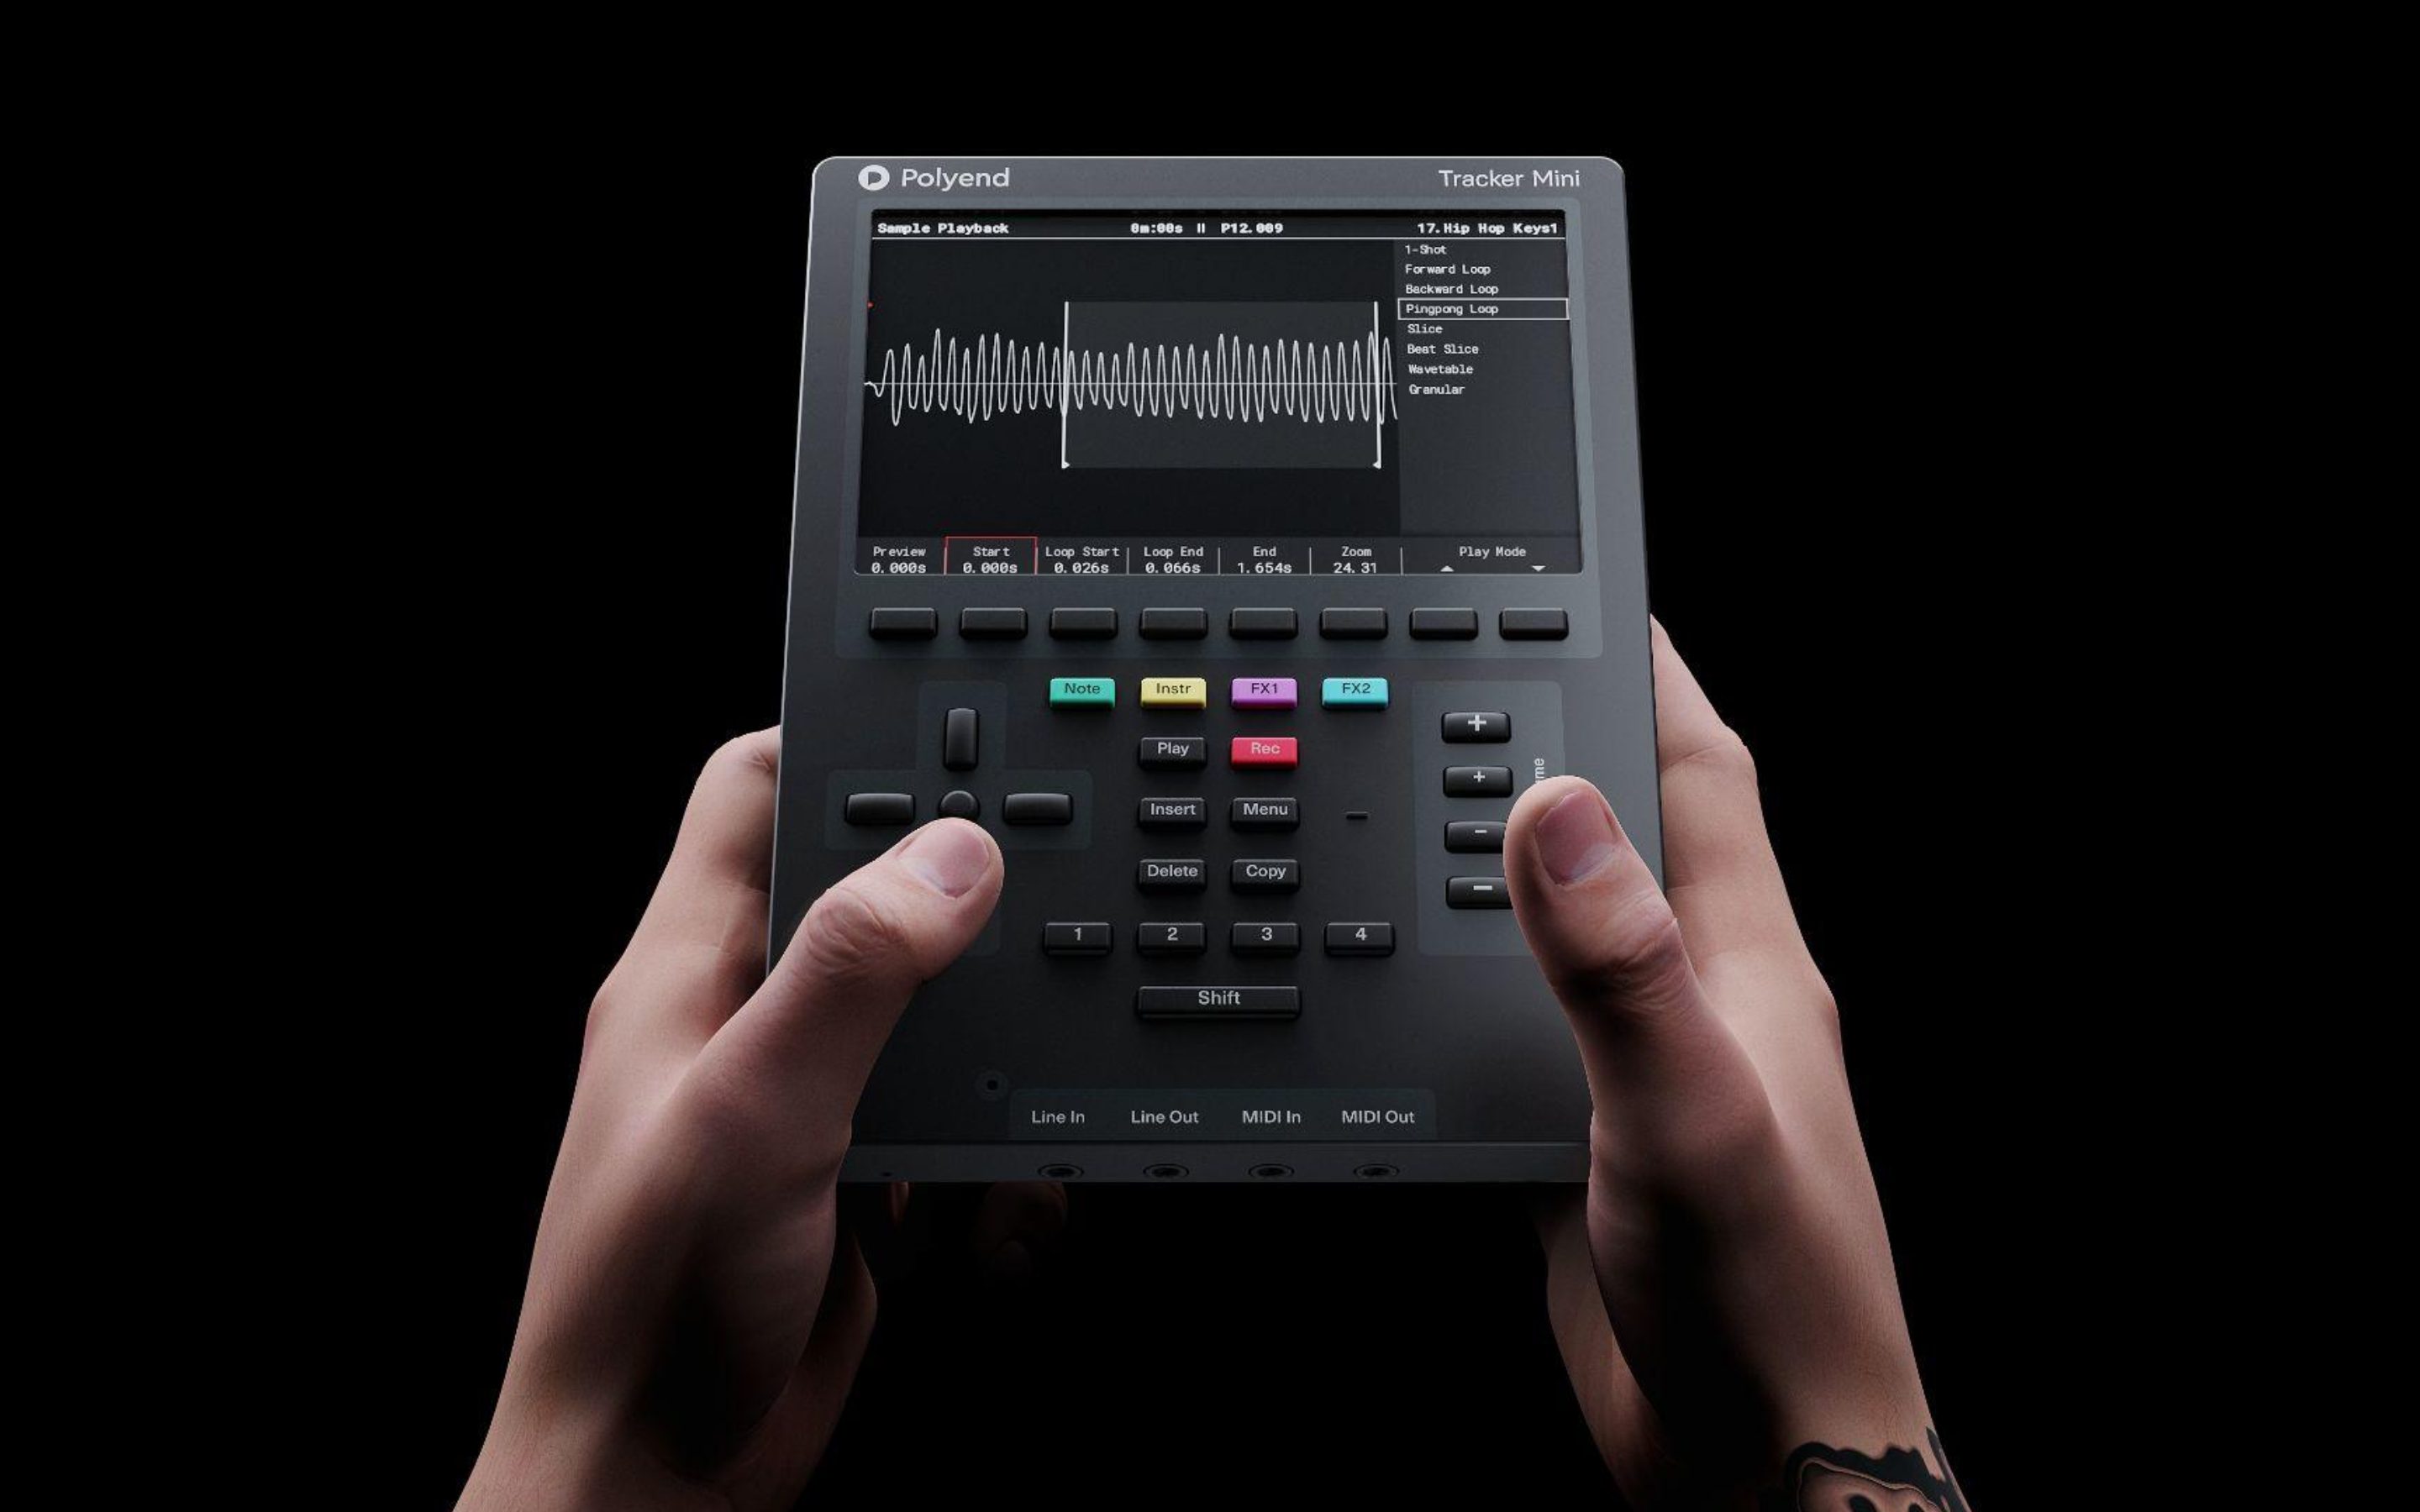 NAMM 2023: Polyend Tracker Mini Unveiled as a Portable Music Production Workstation